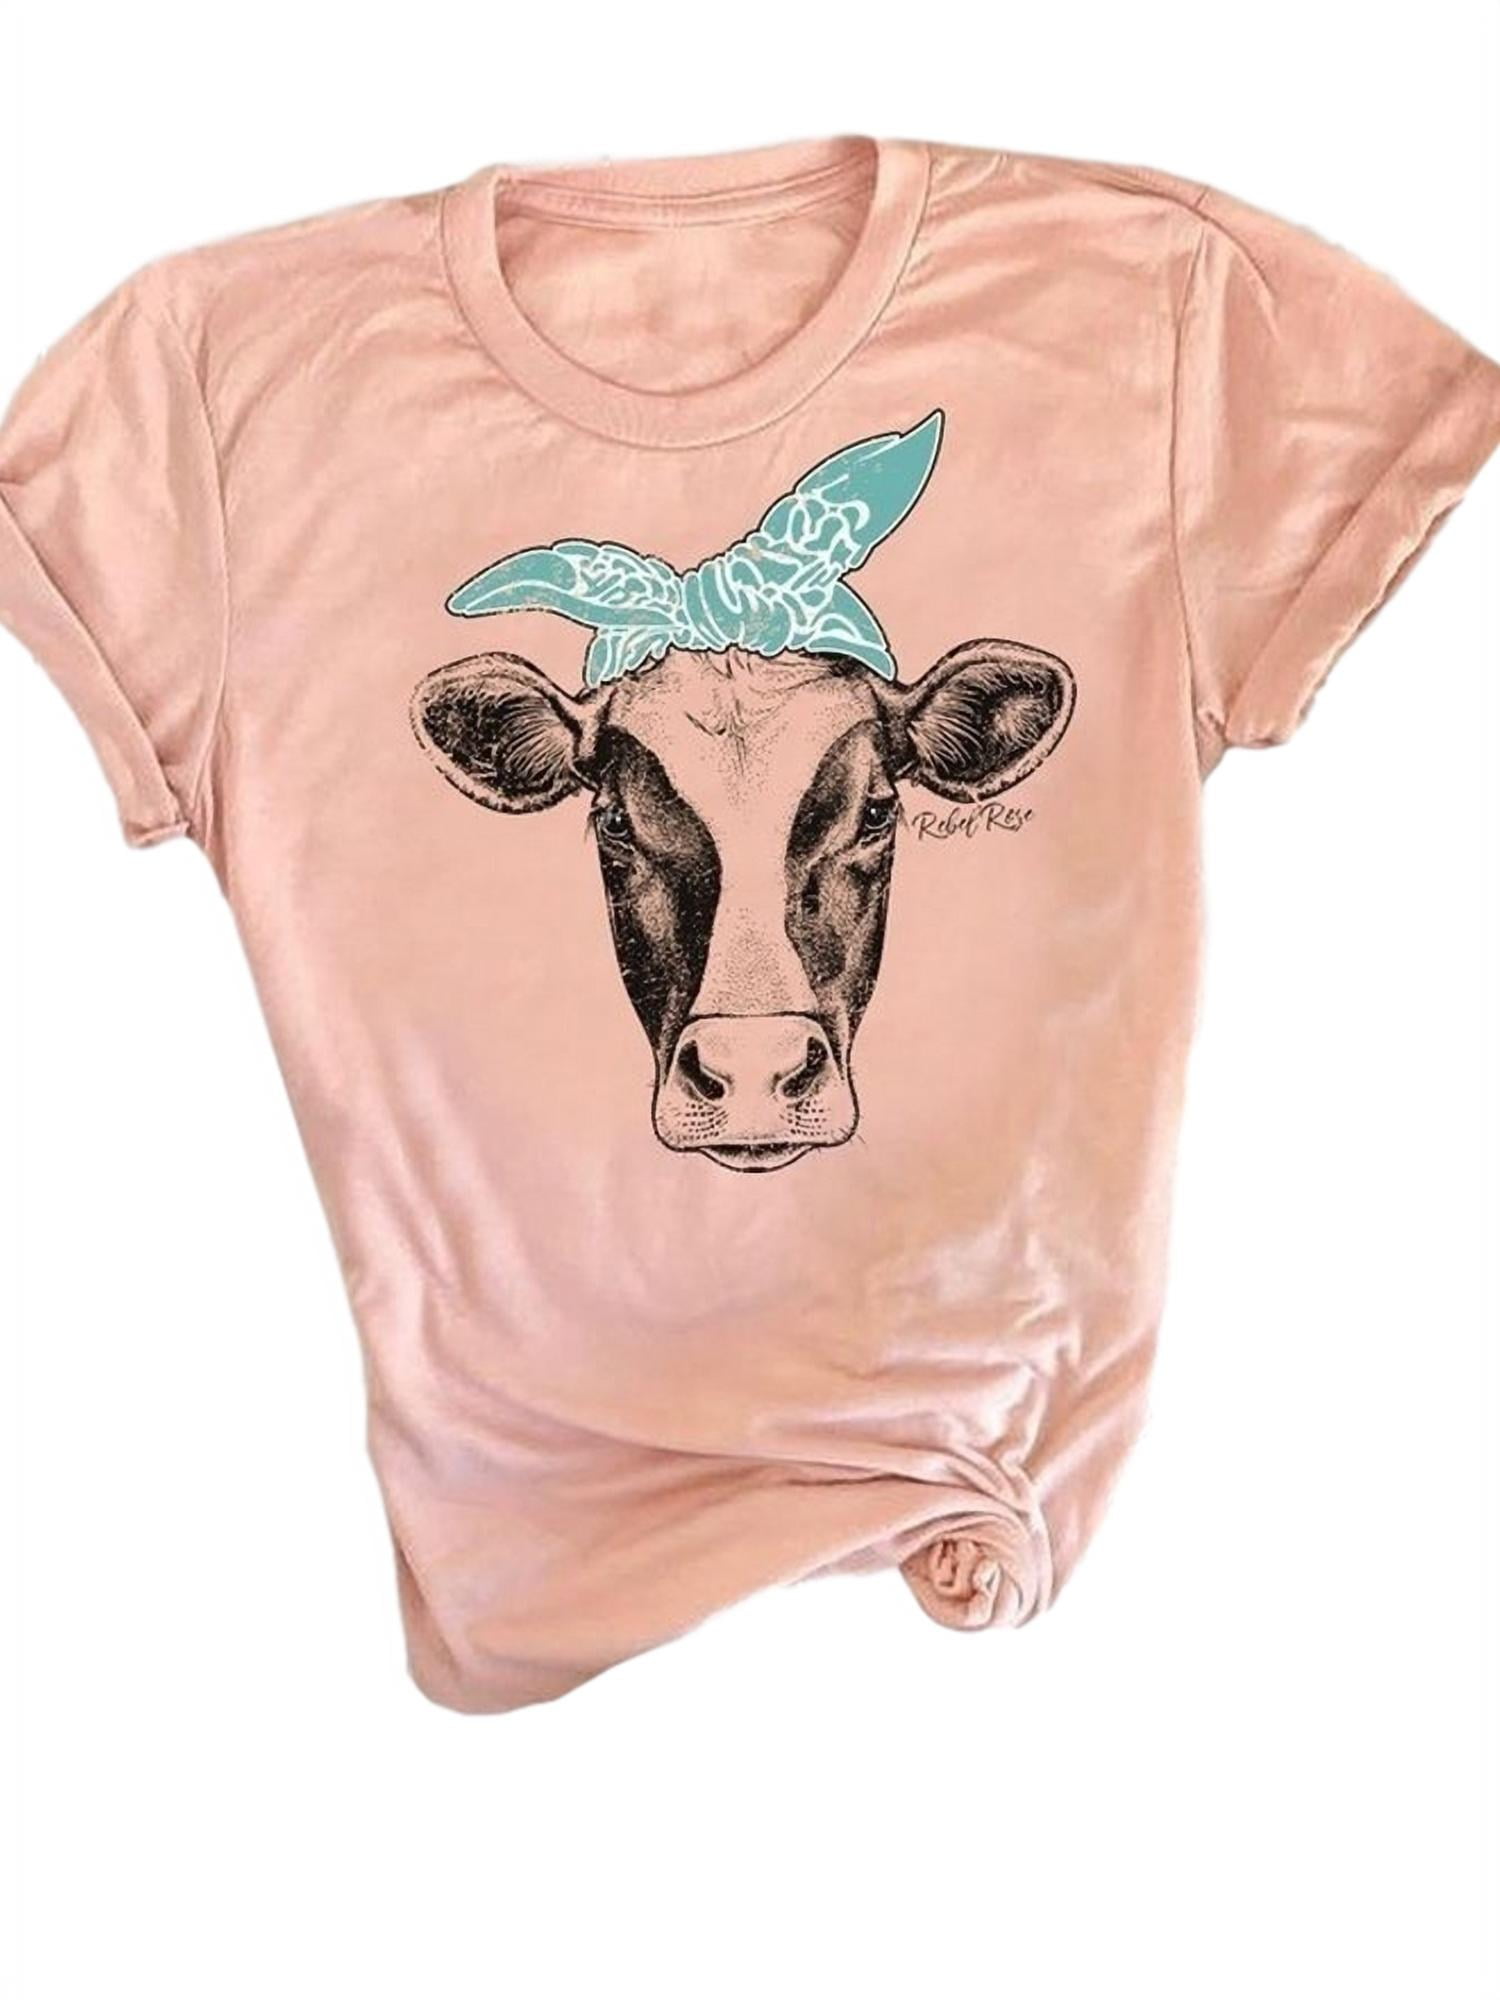 Spring Summer Unisex New Year Cow Animal Love Letter Print O-Neck Short Sleeve Cotton Tops T-Shirt Blouse Pullover 